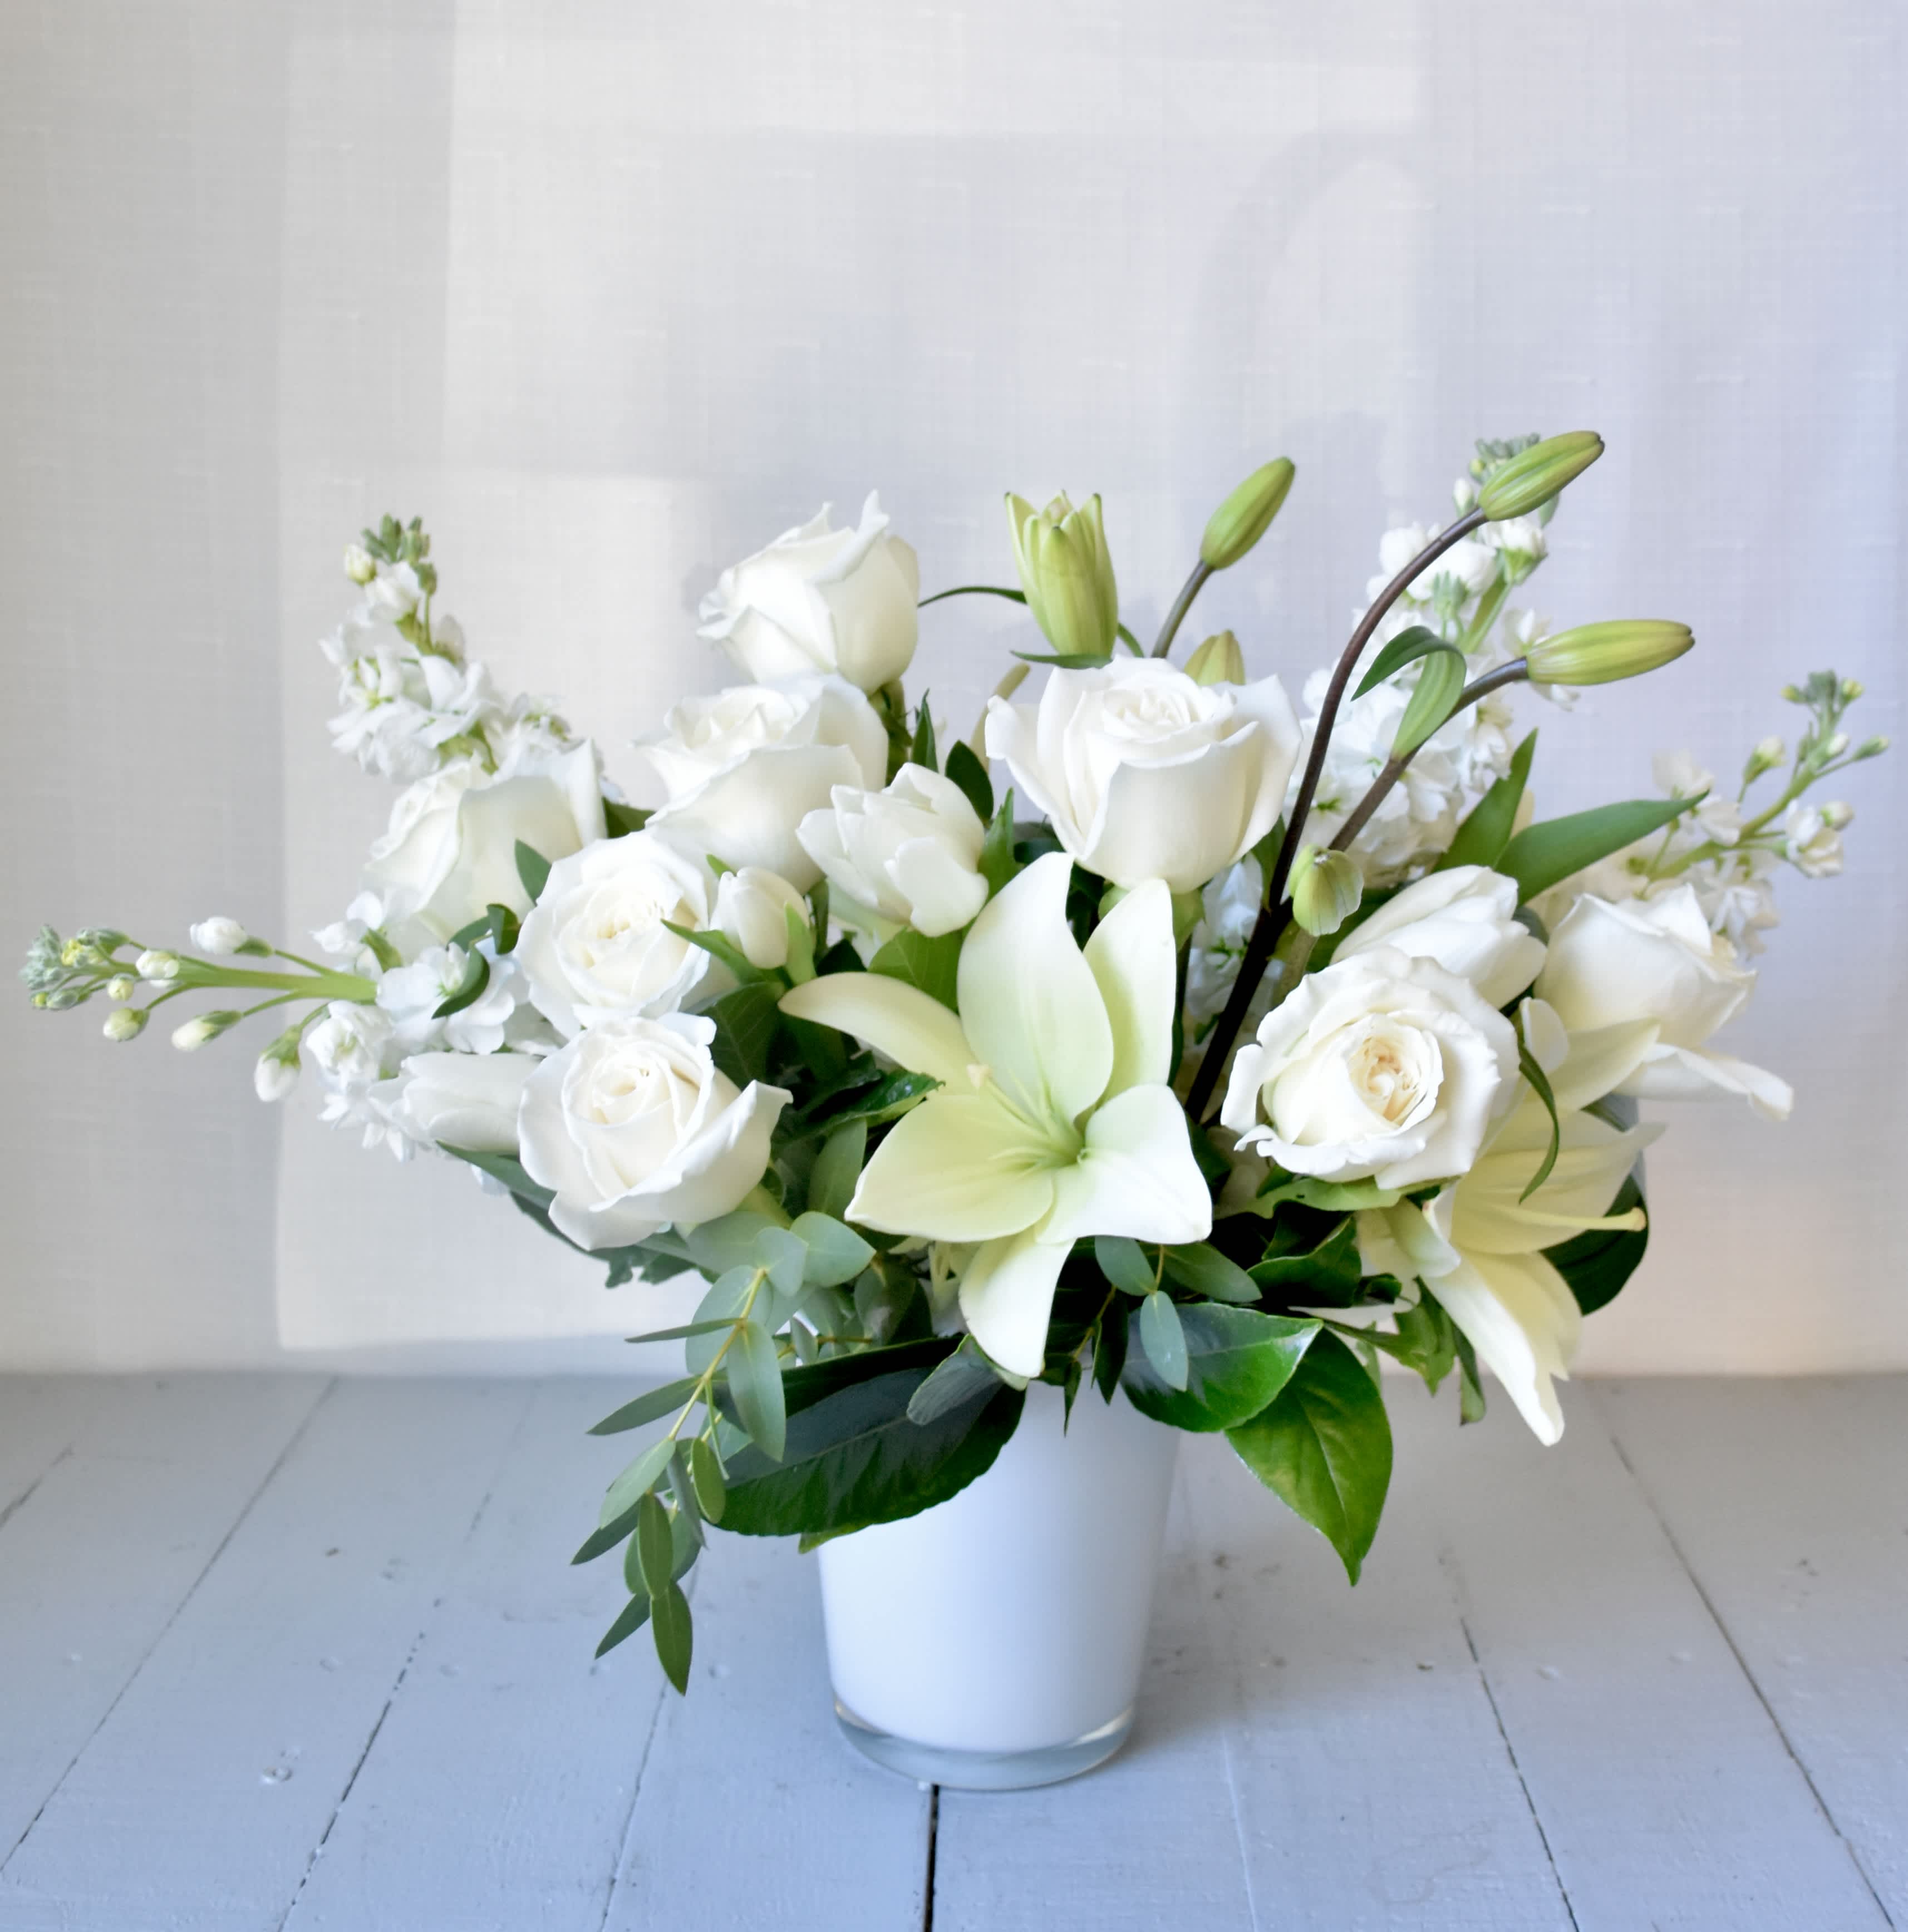 Gracefully Elegant - Gracefully Elegant is a modern and compact white arrangement filled with luxury flowers such as Lilies and imported Roses as well as seasonally available flowers sourced from our local growers. It's the perfect gift when you want to make a statement. 